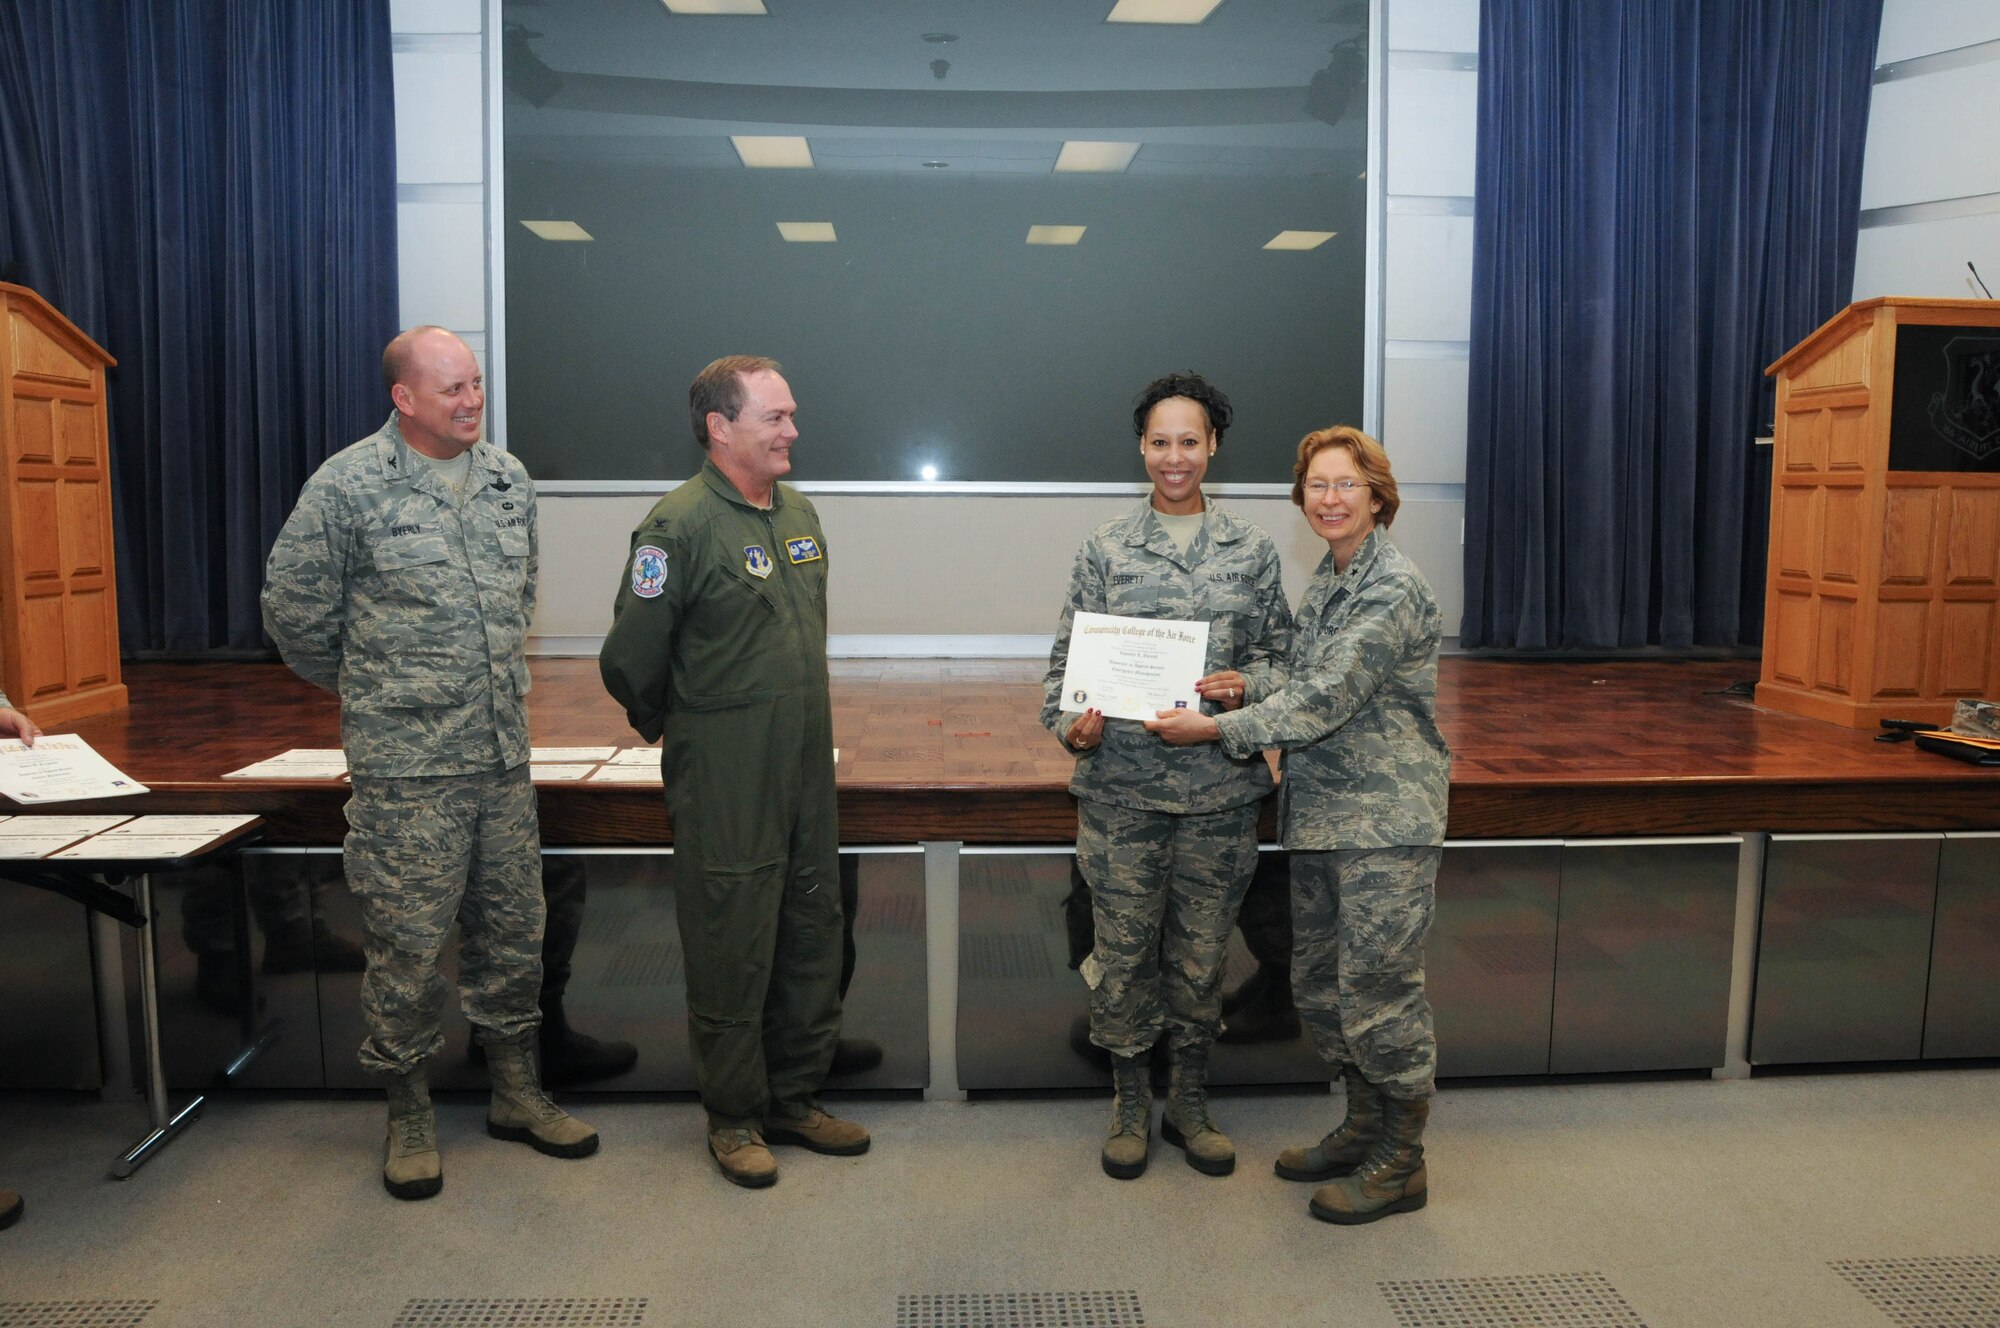 U.S. Air Force Tech. Sgt. Zaquette Everett, second from right, a member of the 166th Airlift Wing, receives a certificate from Brig. Gen. Carol Timmons, assistant adjutant general for air, Delaware National Guard to recognize Everett’s attainment of a Community College of the Air Force associate of applied science degree in vehicle maintenance at a CCAF Class of October 2013 graduation ceremony held Nov. 3, 2013 at the New Castle Air National Guard Base, Del. 166th AW Commander Col. Mike Feeley, second from left, is next to 166th AW Vice-Commander Col. Dave Byerly. (U.S. Air National Guard photo by Tech. Sgt. Robin Meredith)